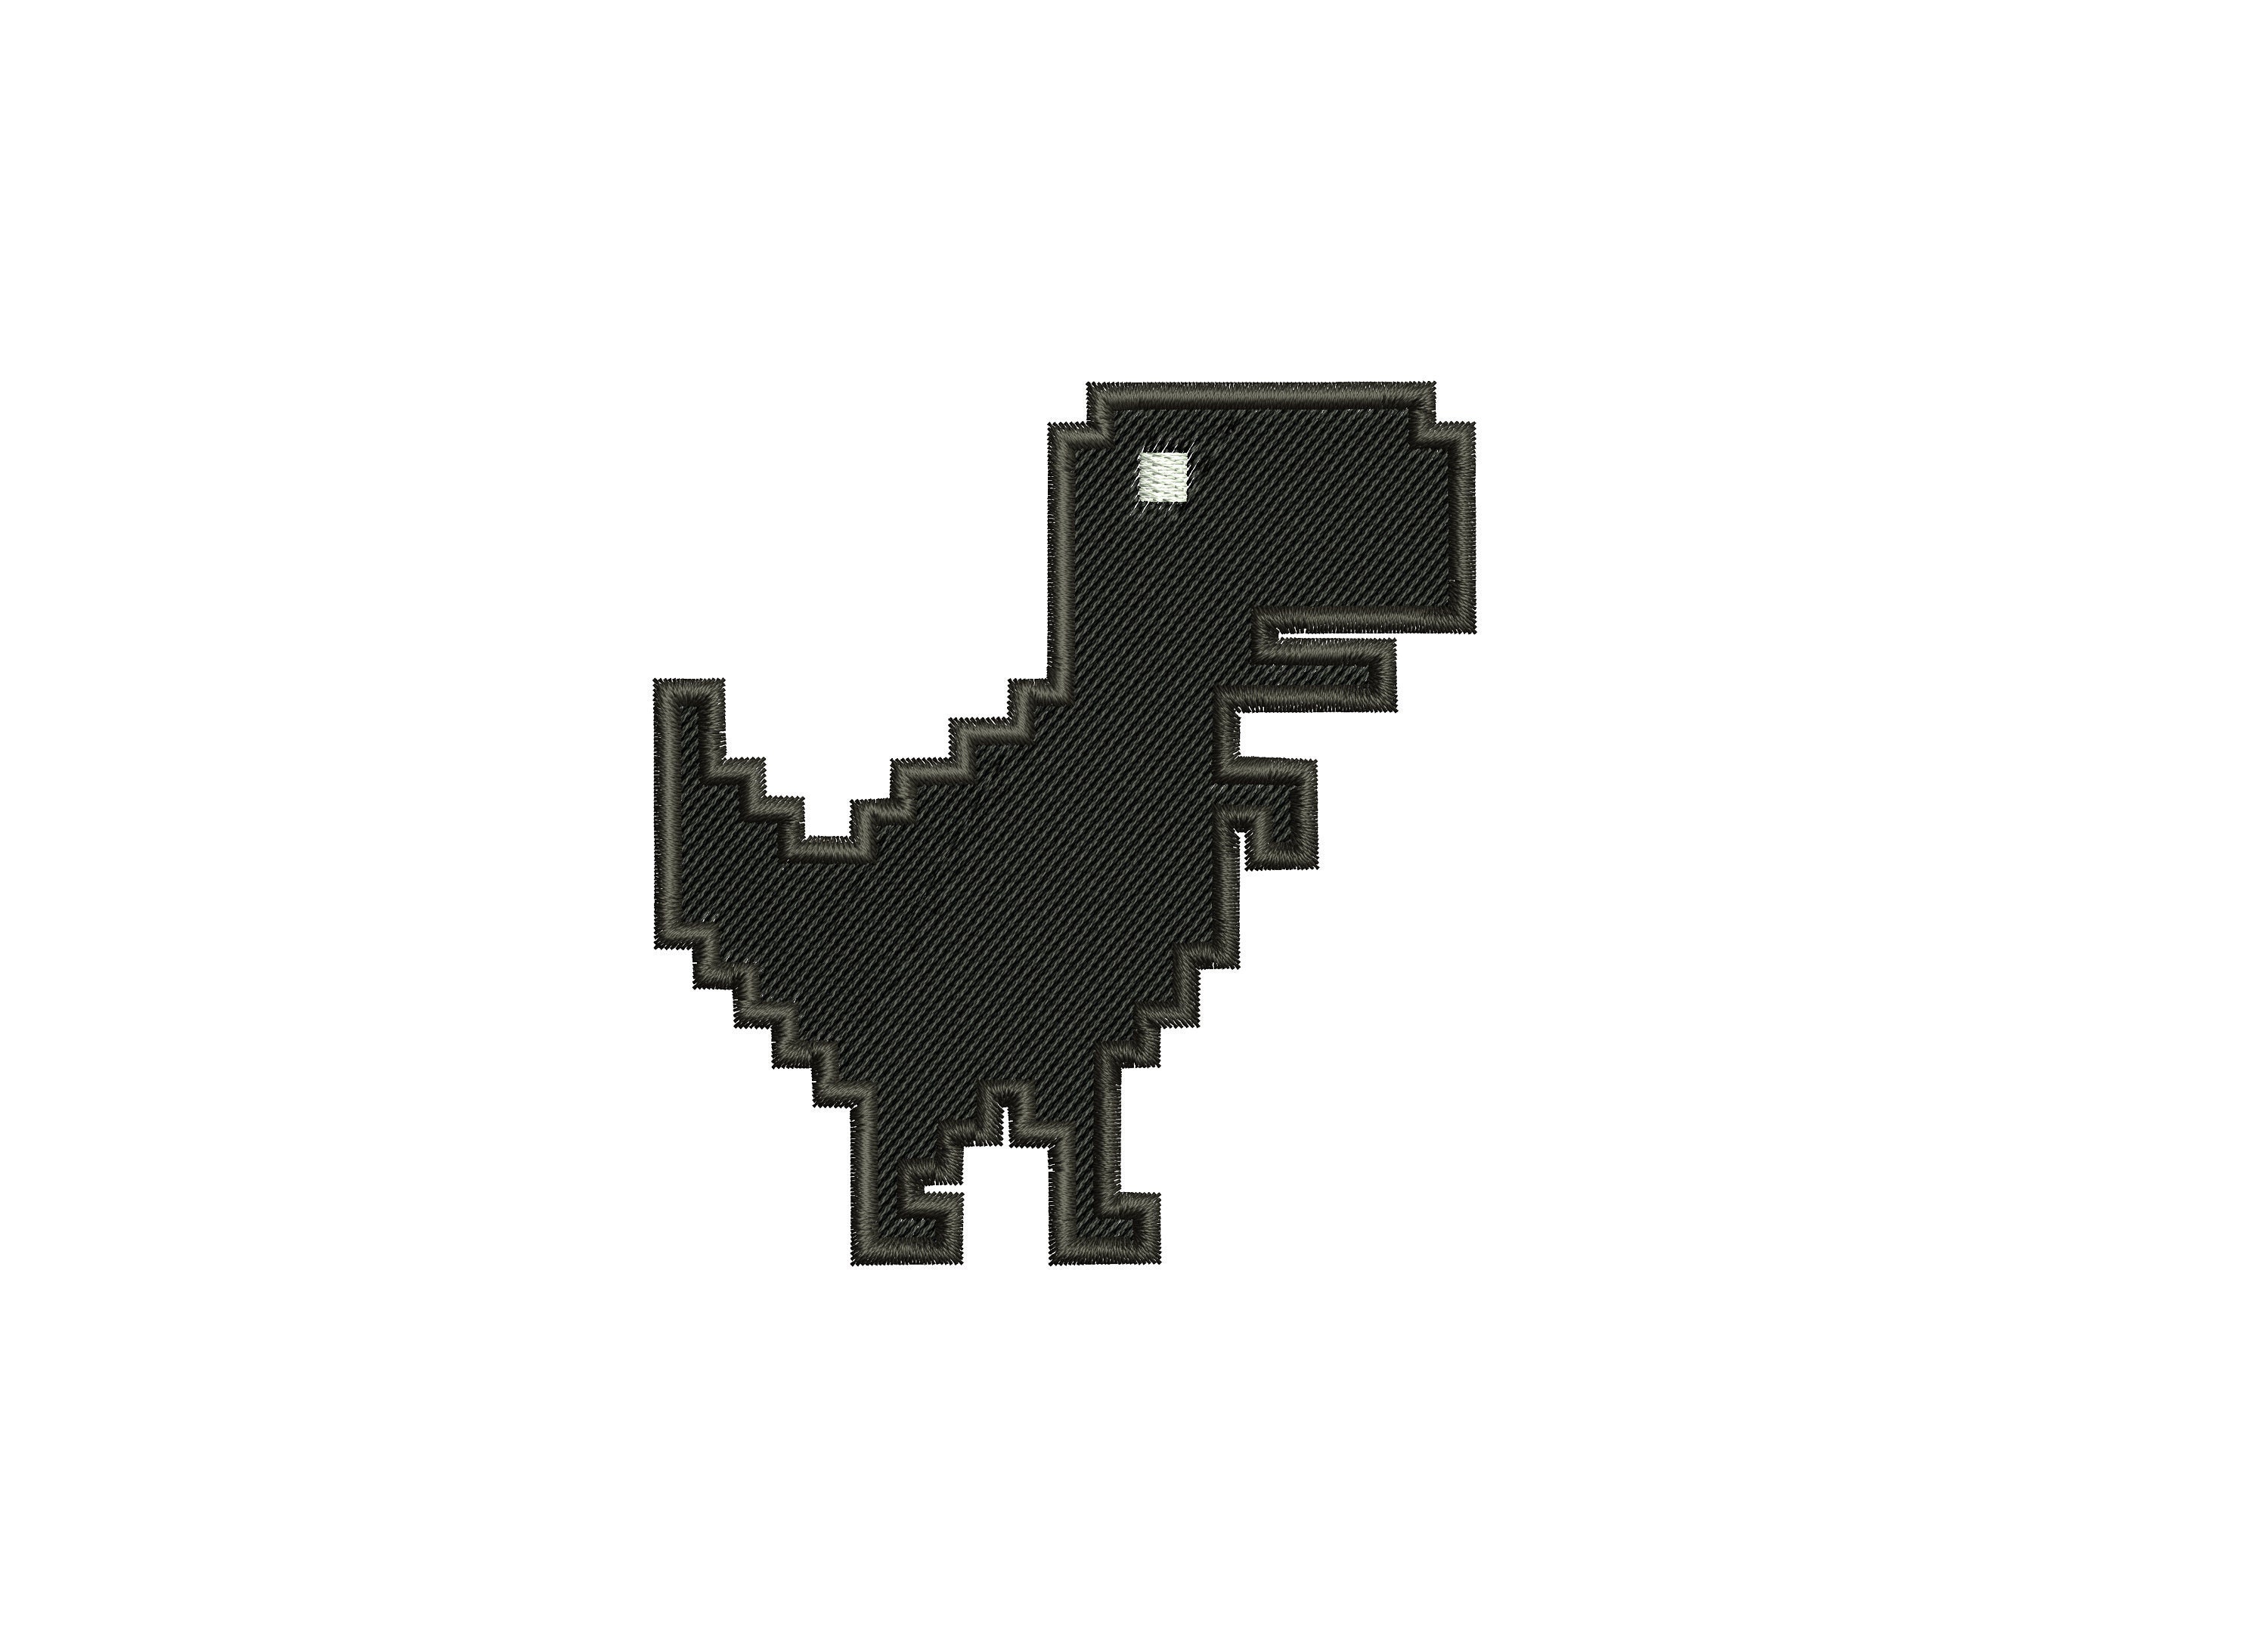 Chrome Dino (also known as T-Rex Game, or the NO INTERNET GAME) is one of  the hidden Google games which original…